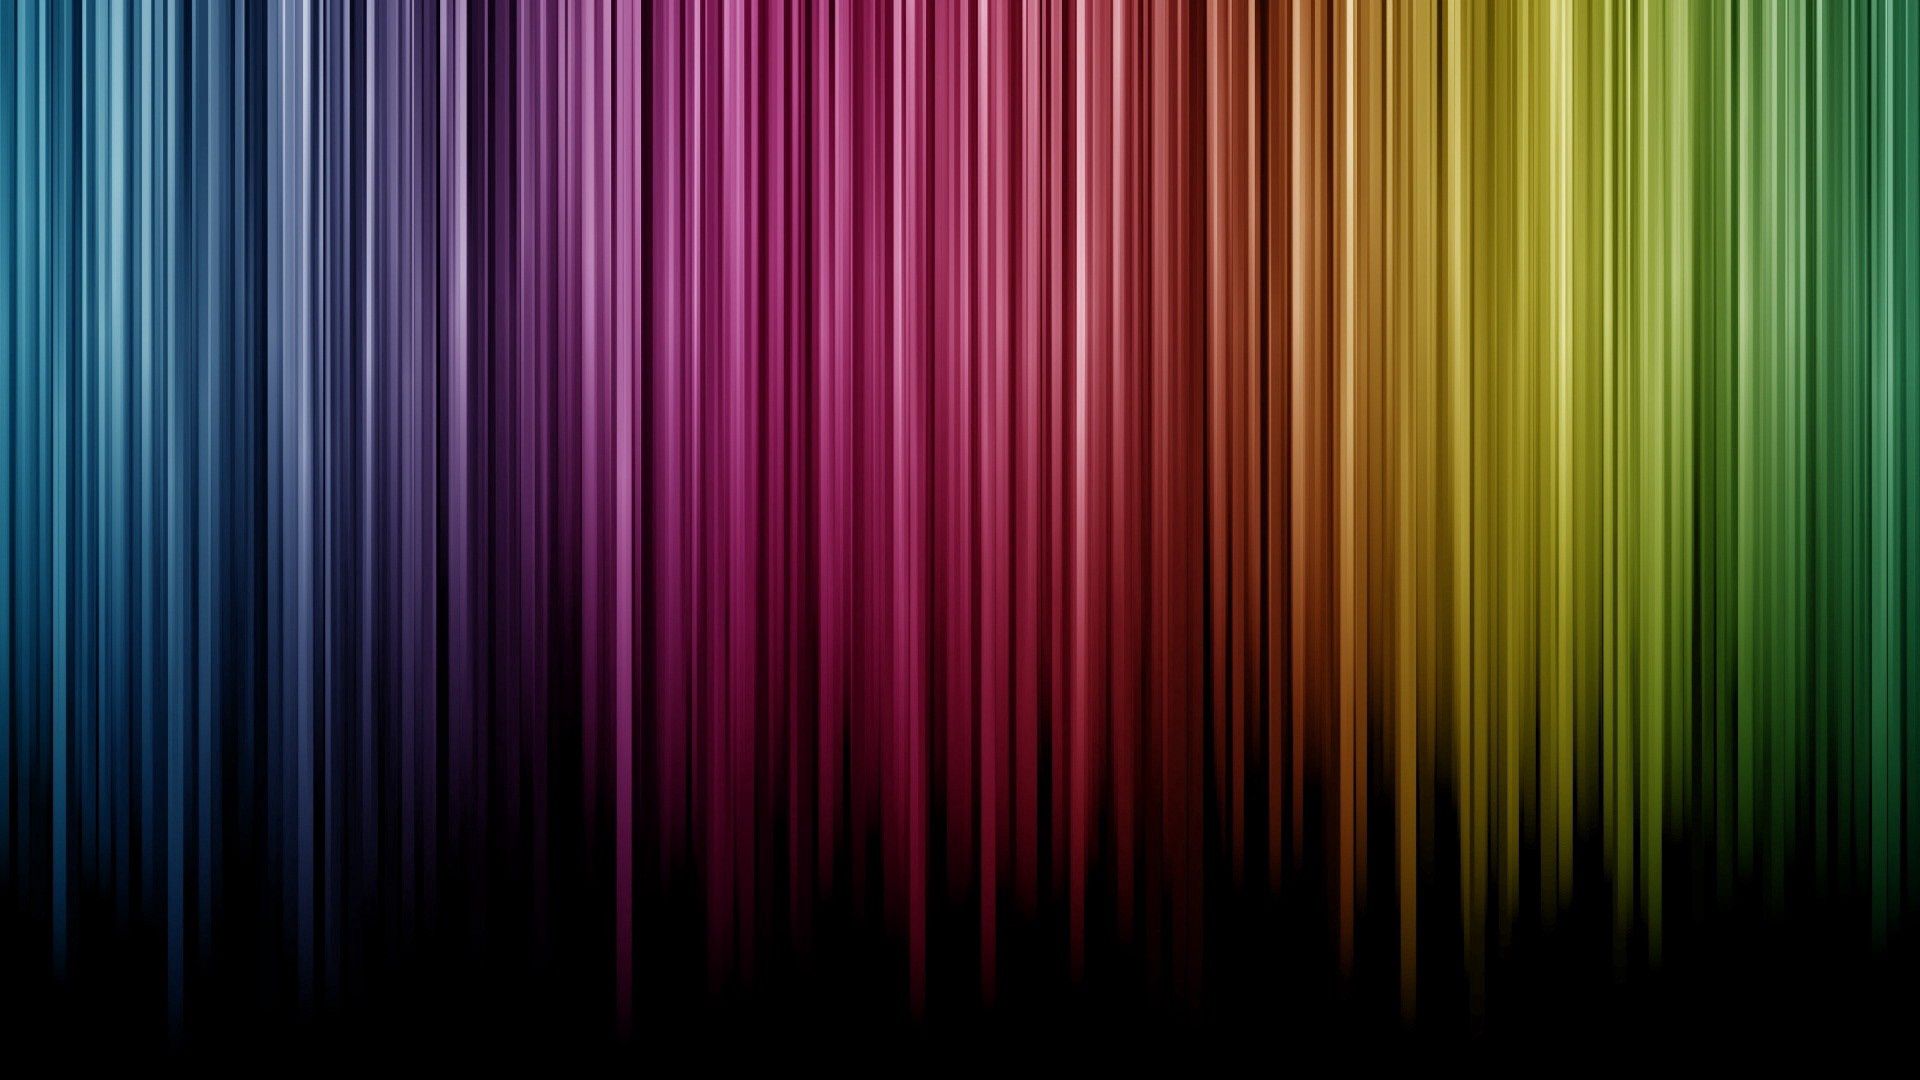 82496 download wallpaper abstract, background, multicolored, motley, lines, shadow, vertical screensavers and pictures for free